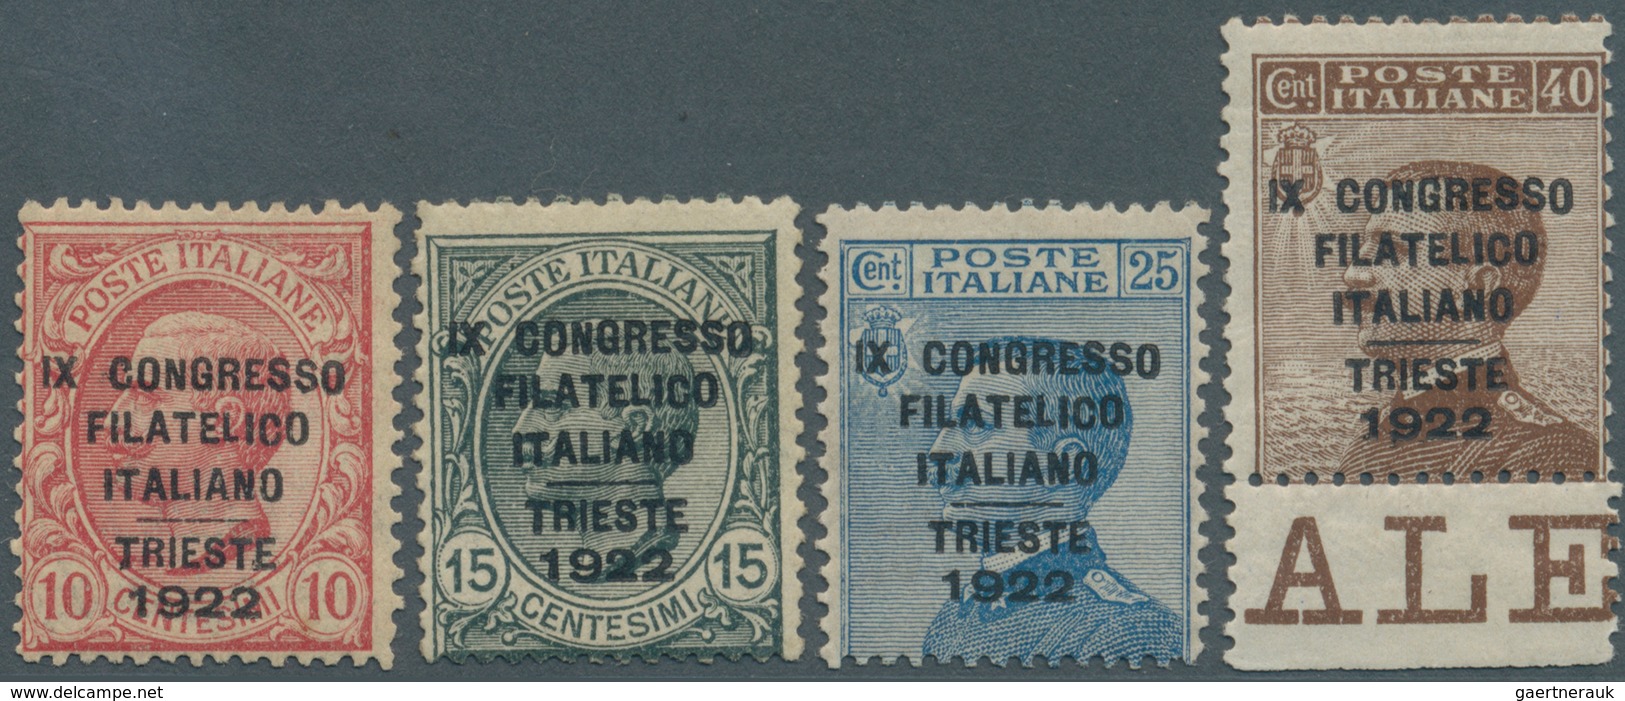 Italien: 1922, Philatelic Congress Triest, Complete Set Mint O.g., Several Signatures, E.g. A.Diena, - Mint/hinged